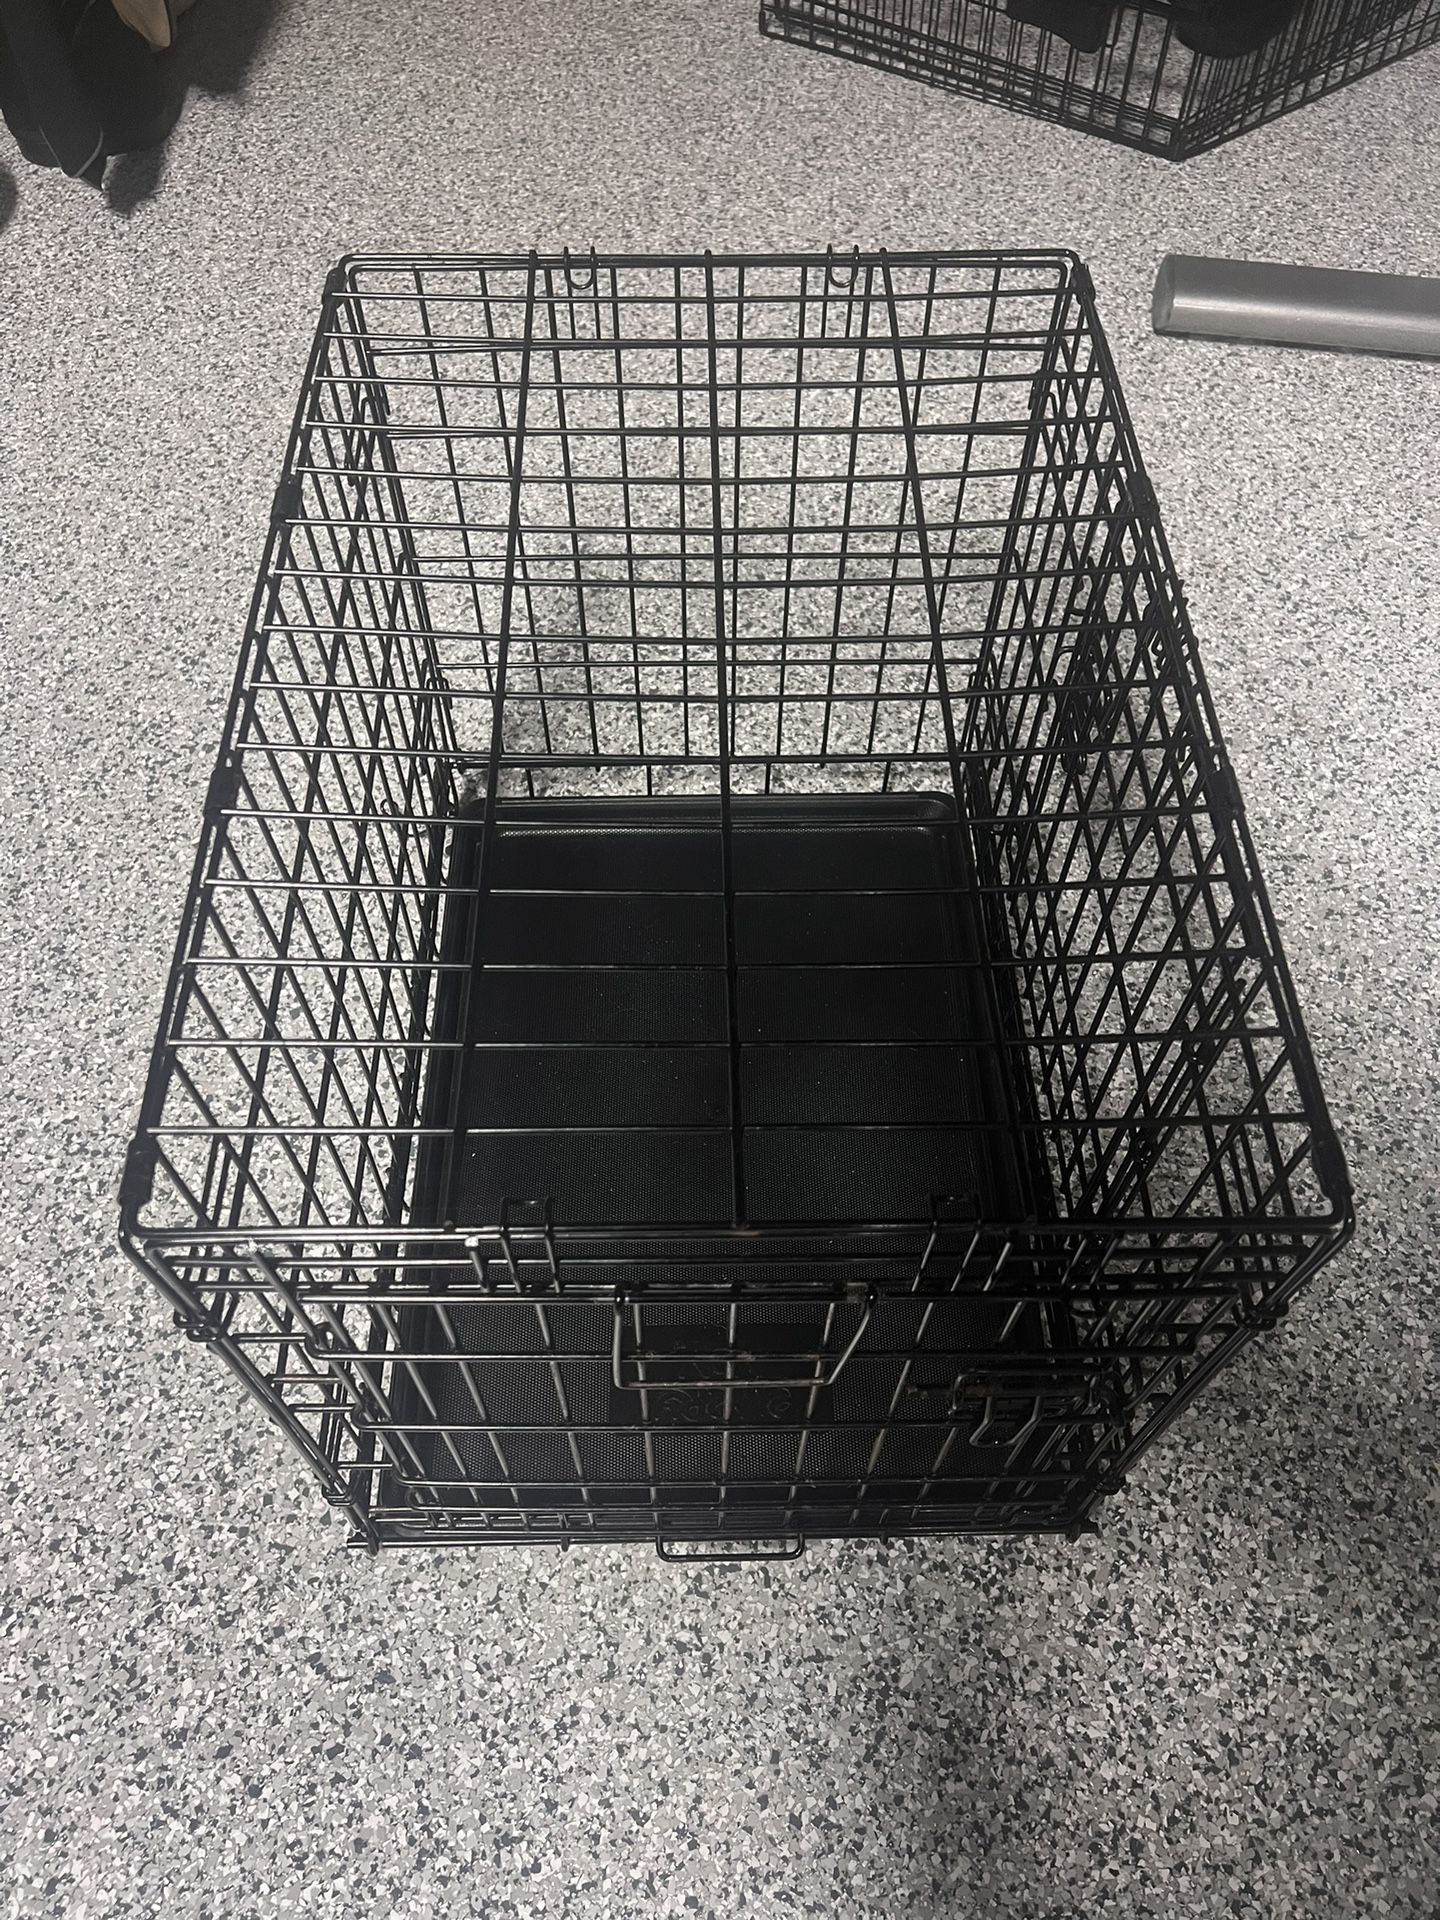 Every Yay Dog Crate/kennel